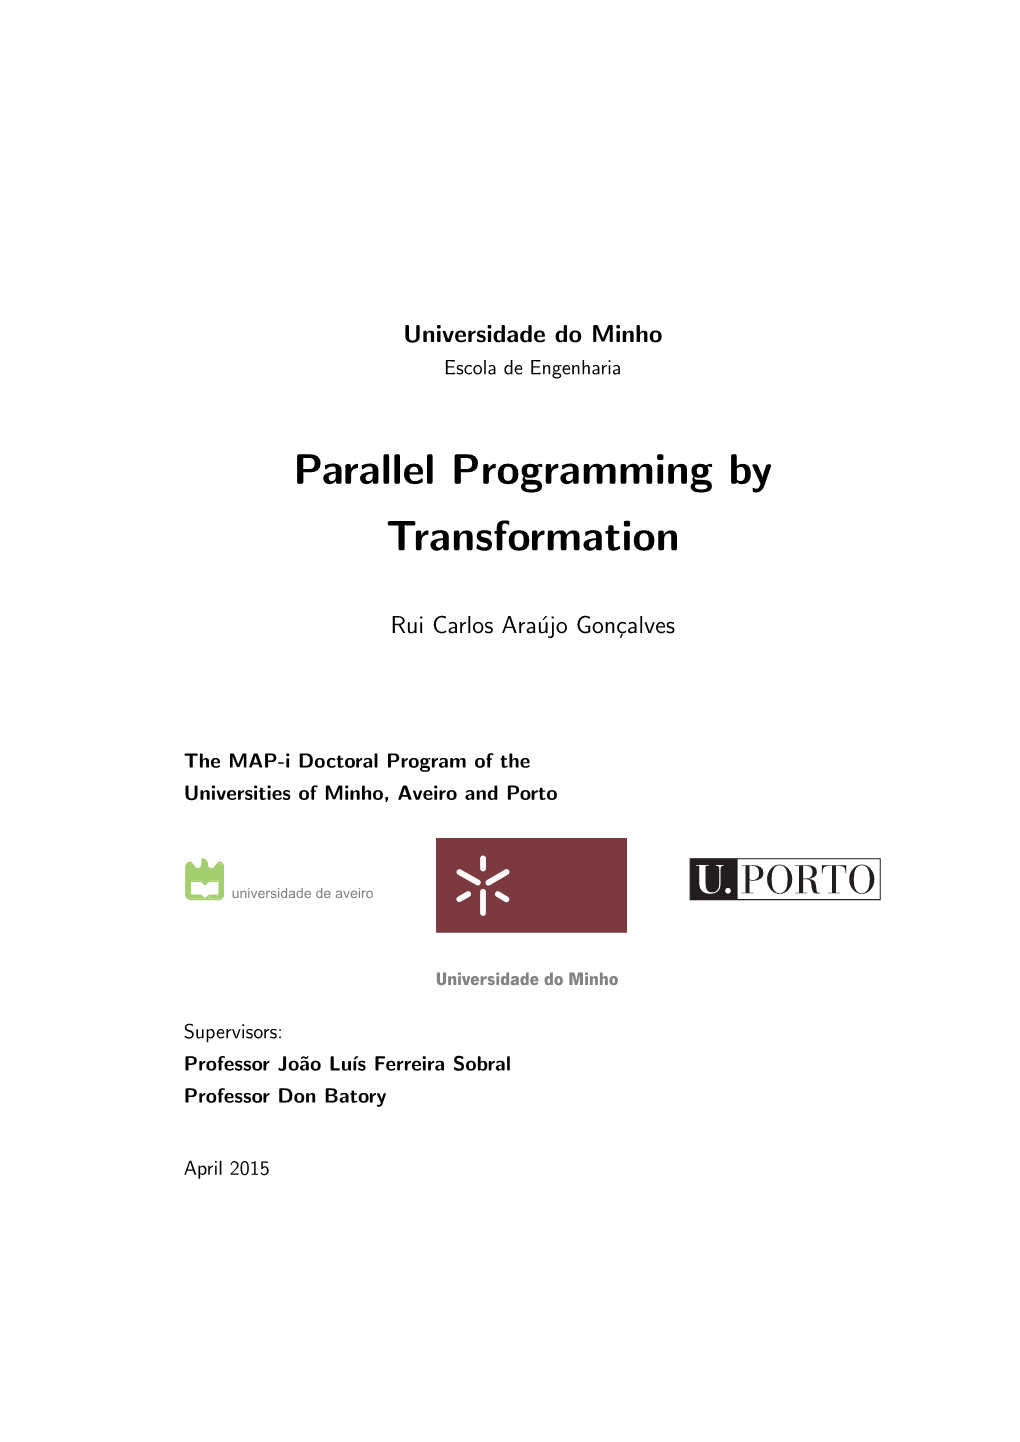 Parallel Programming by Transformation